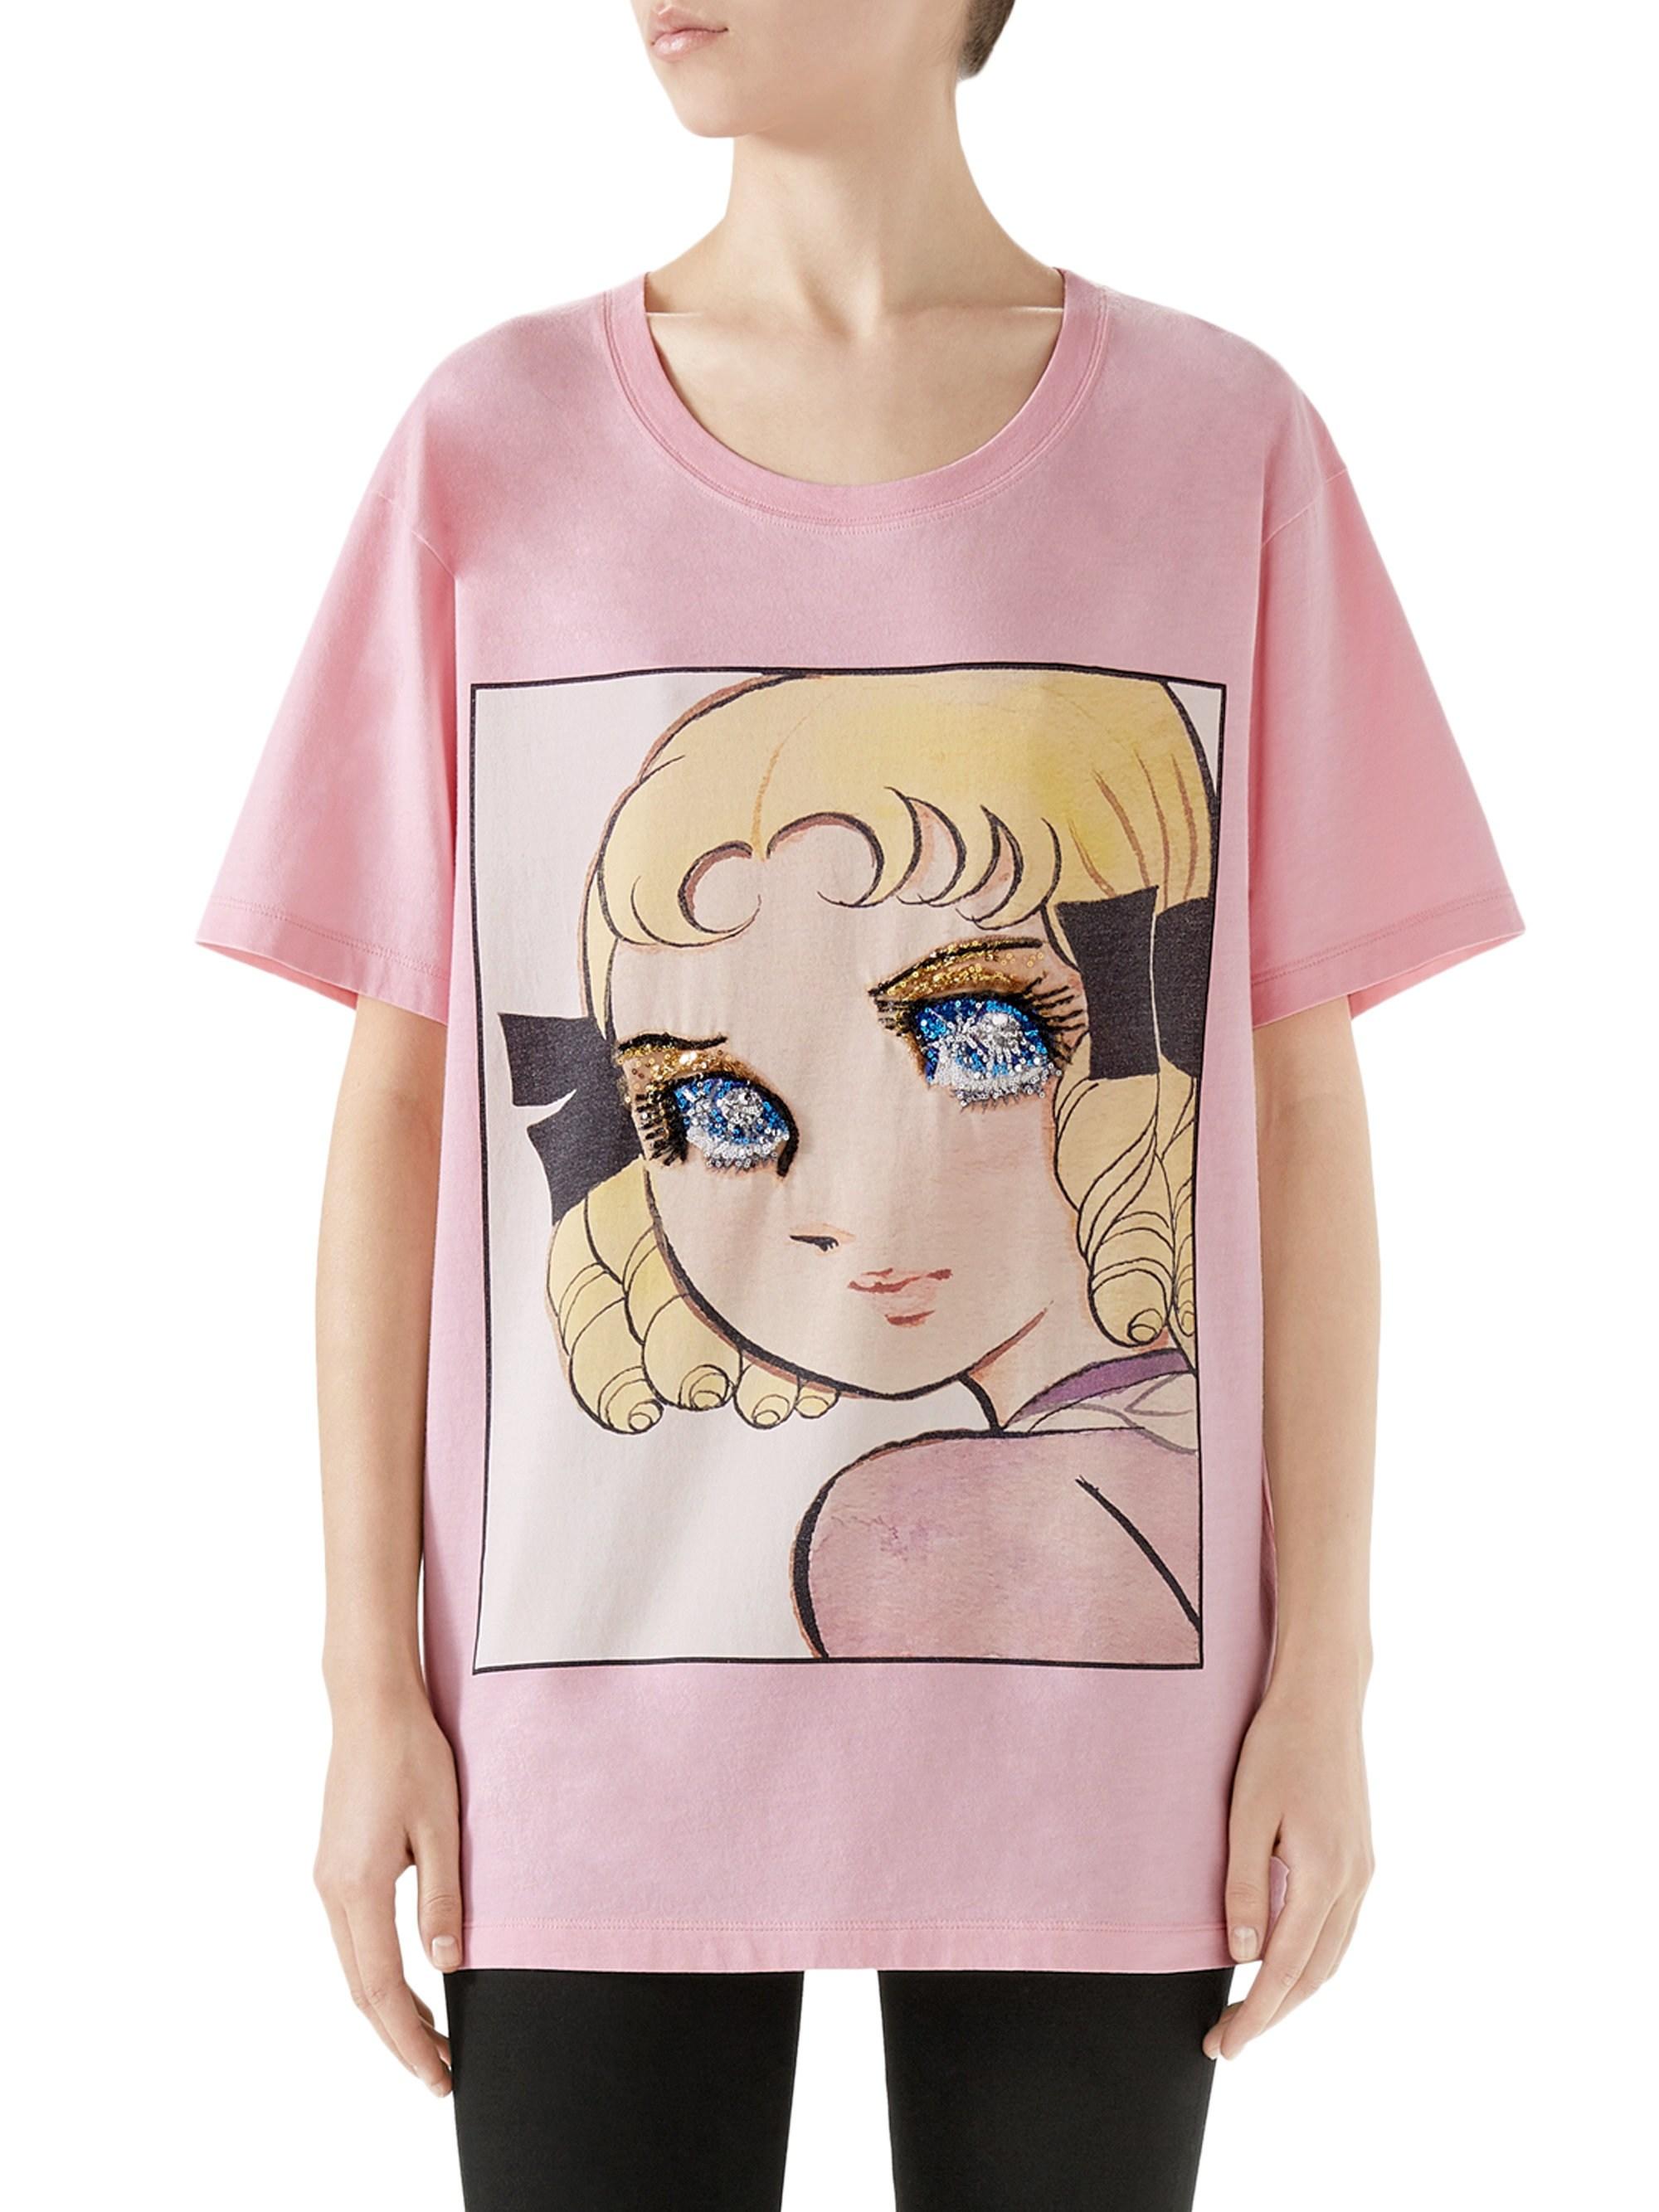 Gucci Cotton Manga Sequin Eyes Tee in 